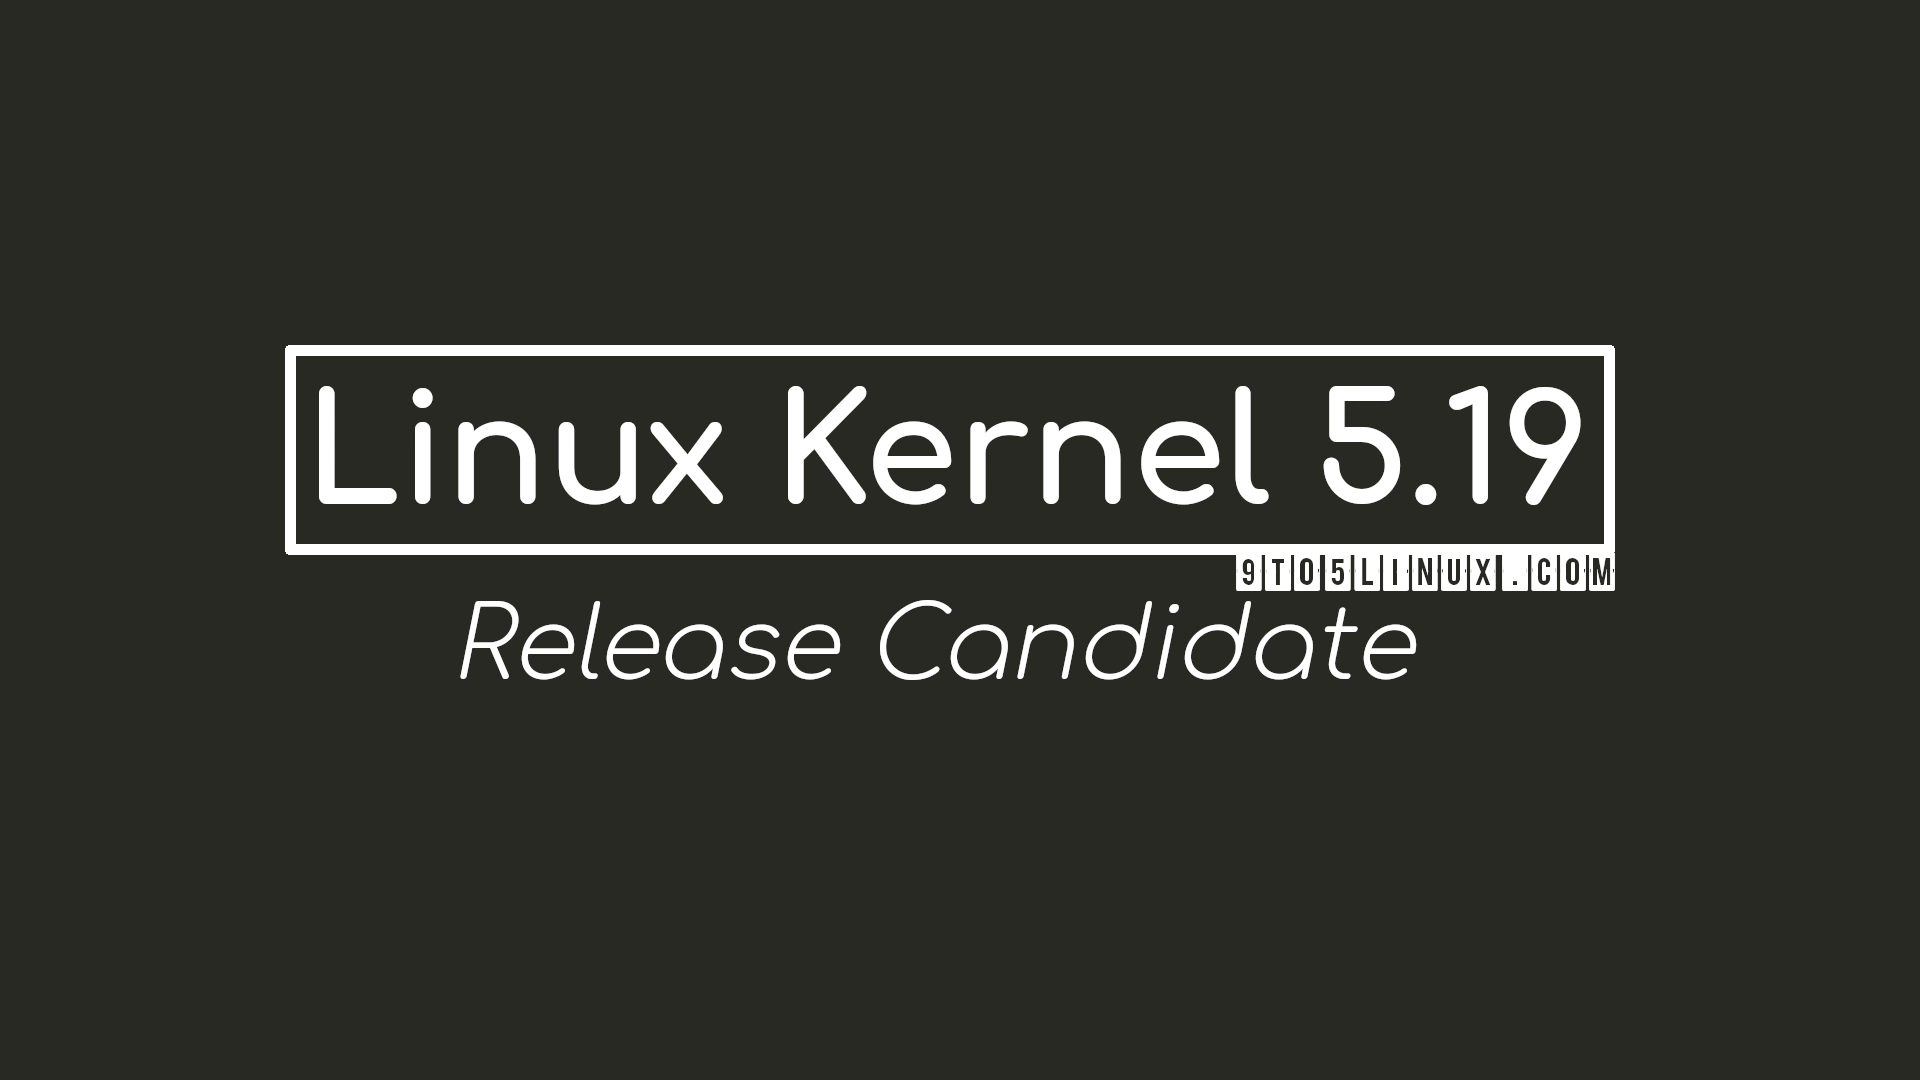 Linus Torvalds Announces First Linux Kernel 5.19 Release Candidate